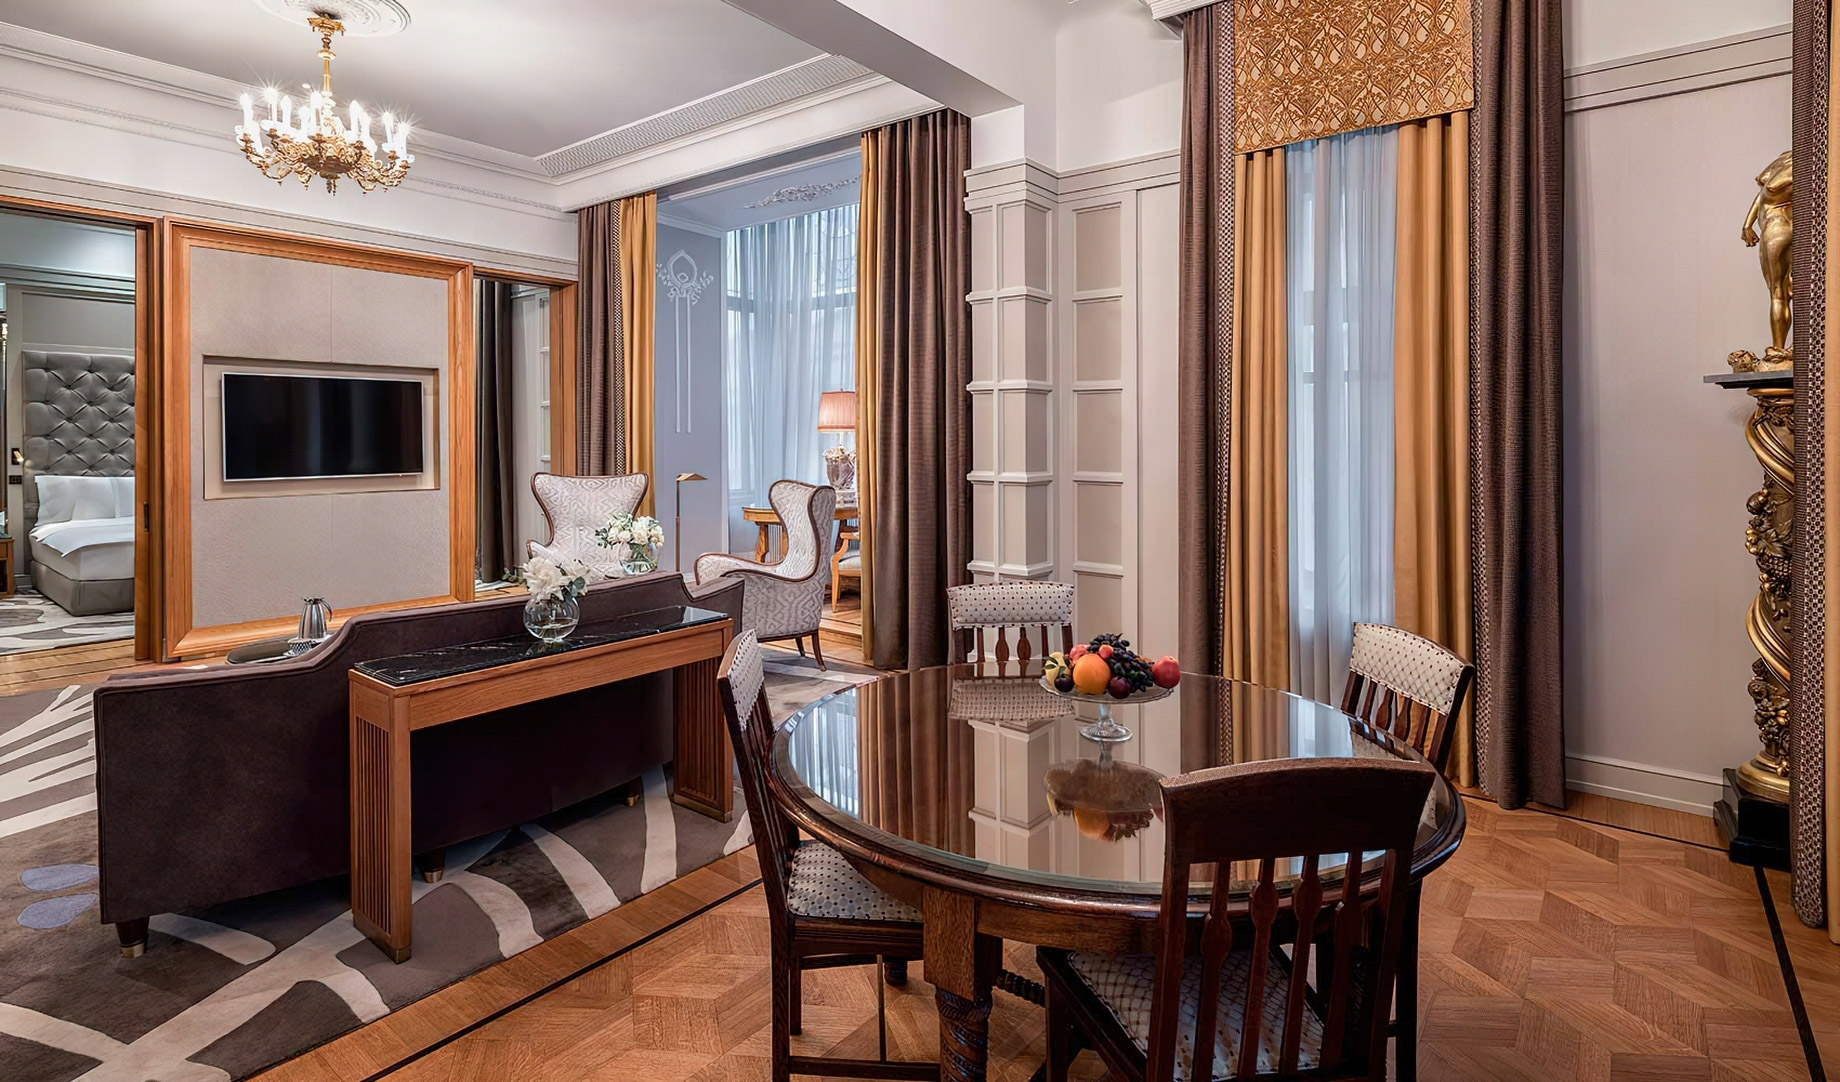 Metropol Hotel Moscow – Moscow, Russia – Premier Suite Interior